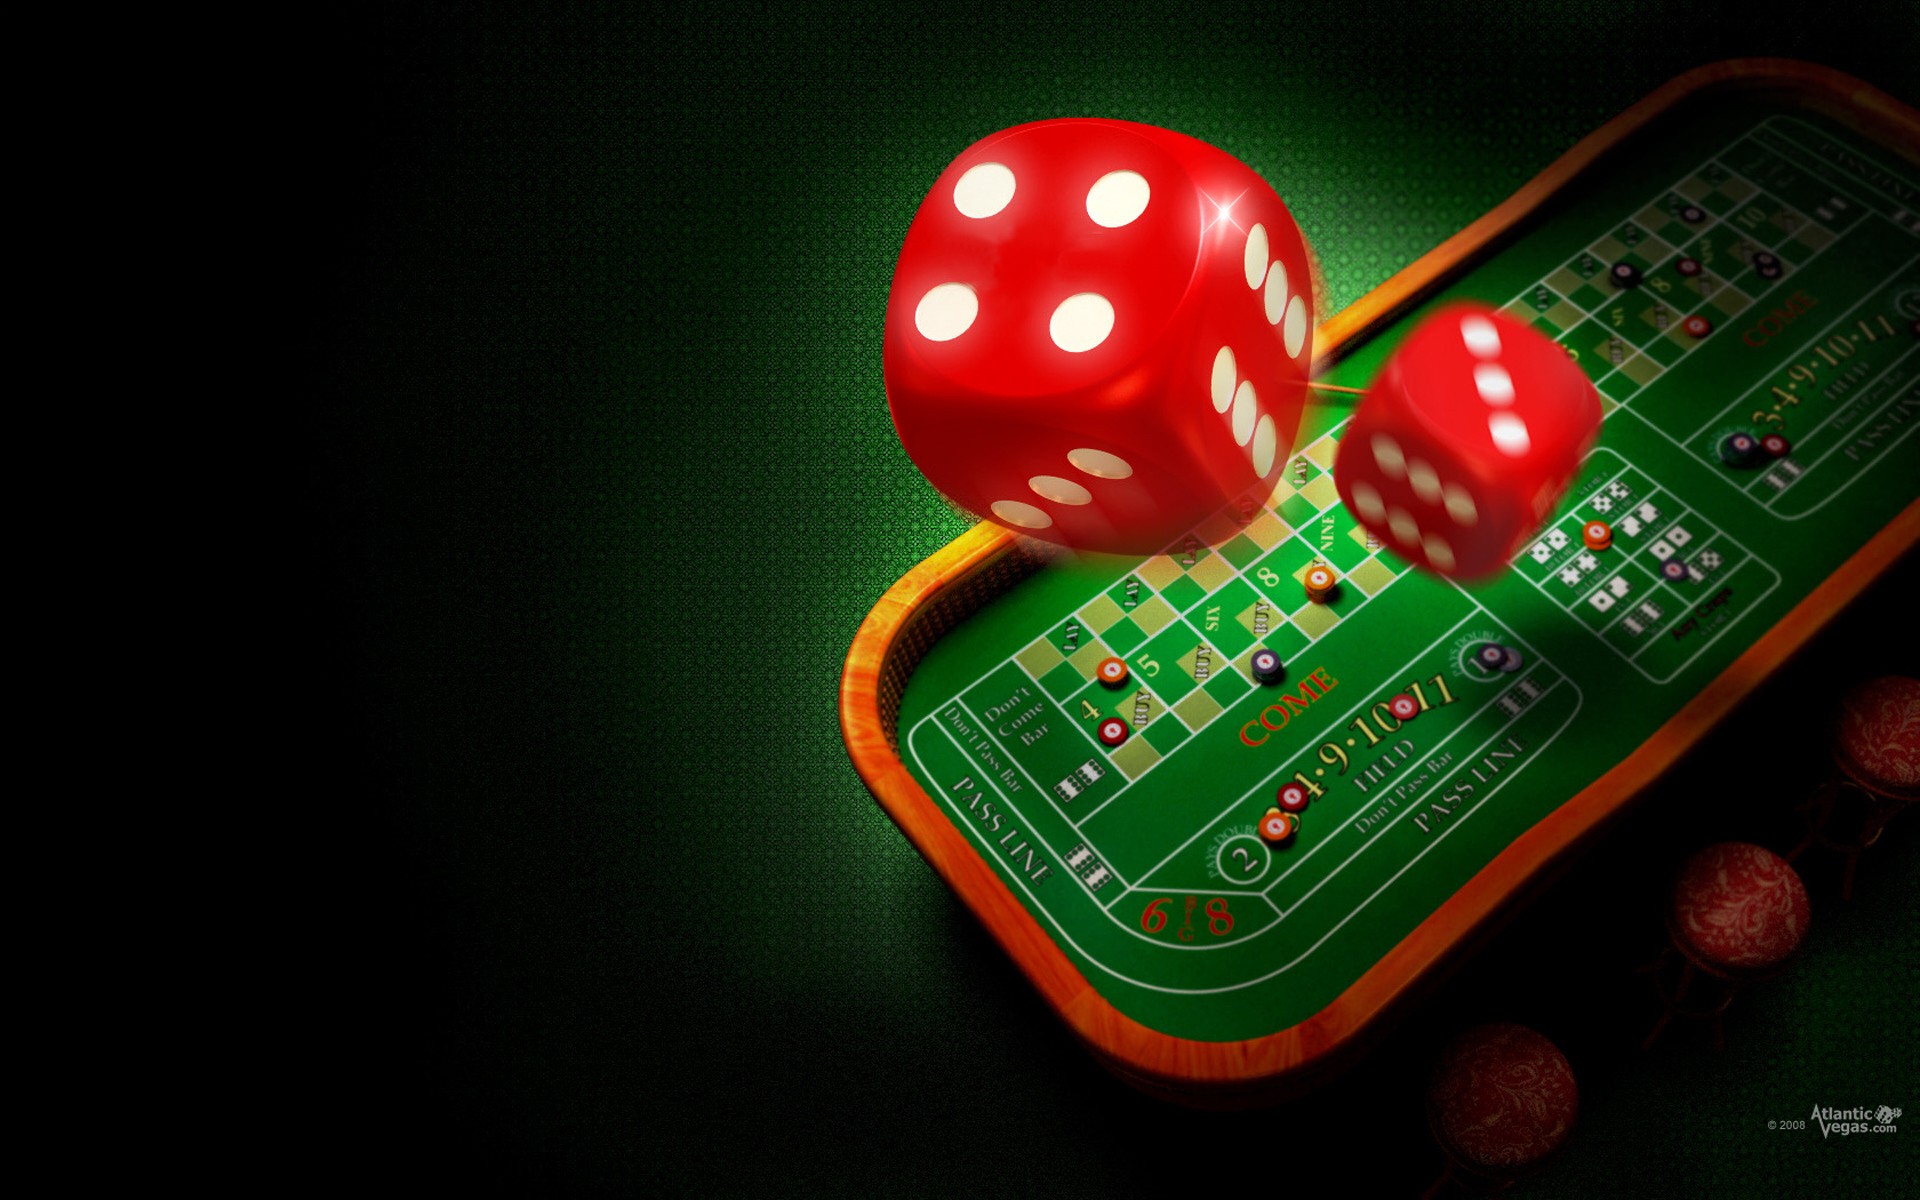 Casino Online: Where Luck Meets Skill